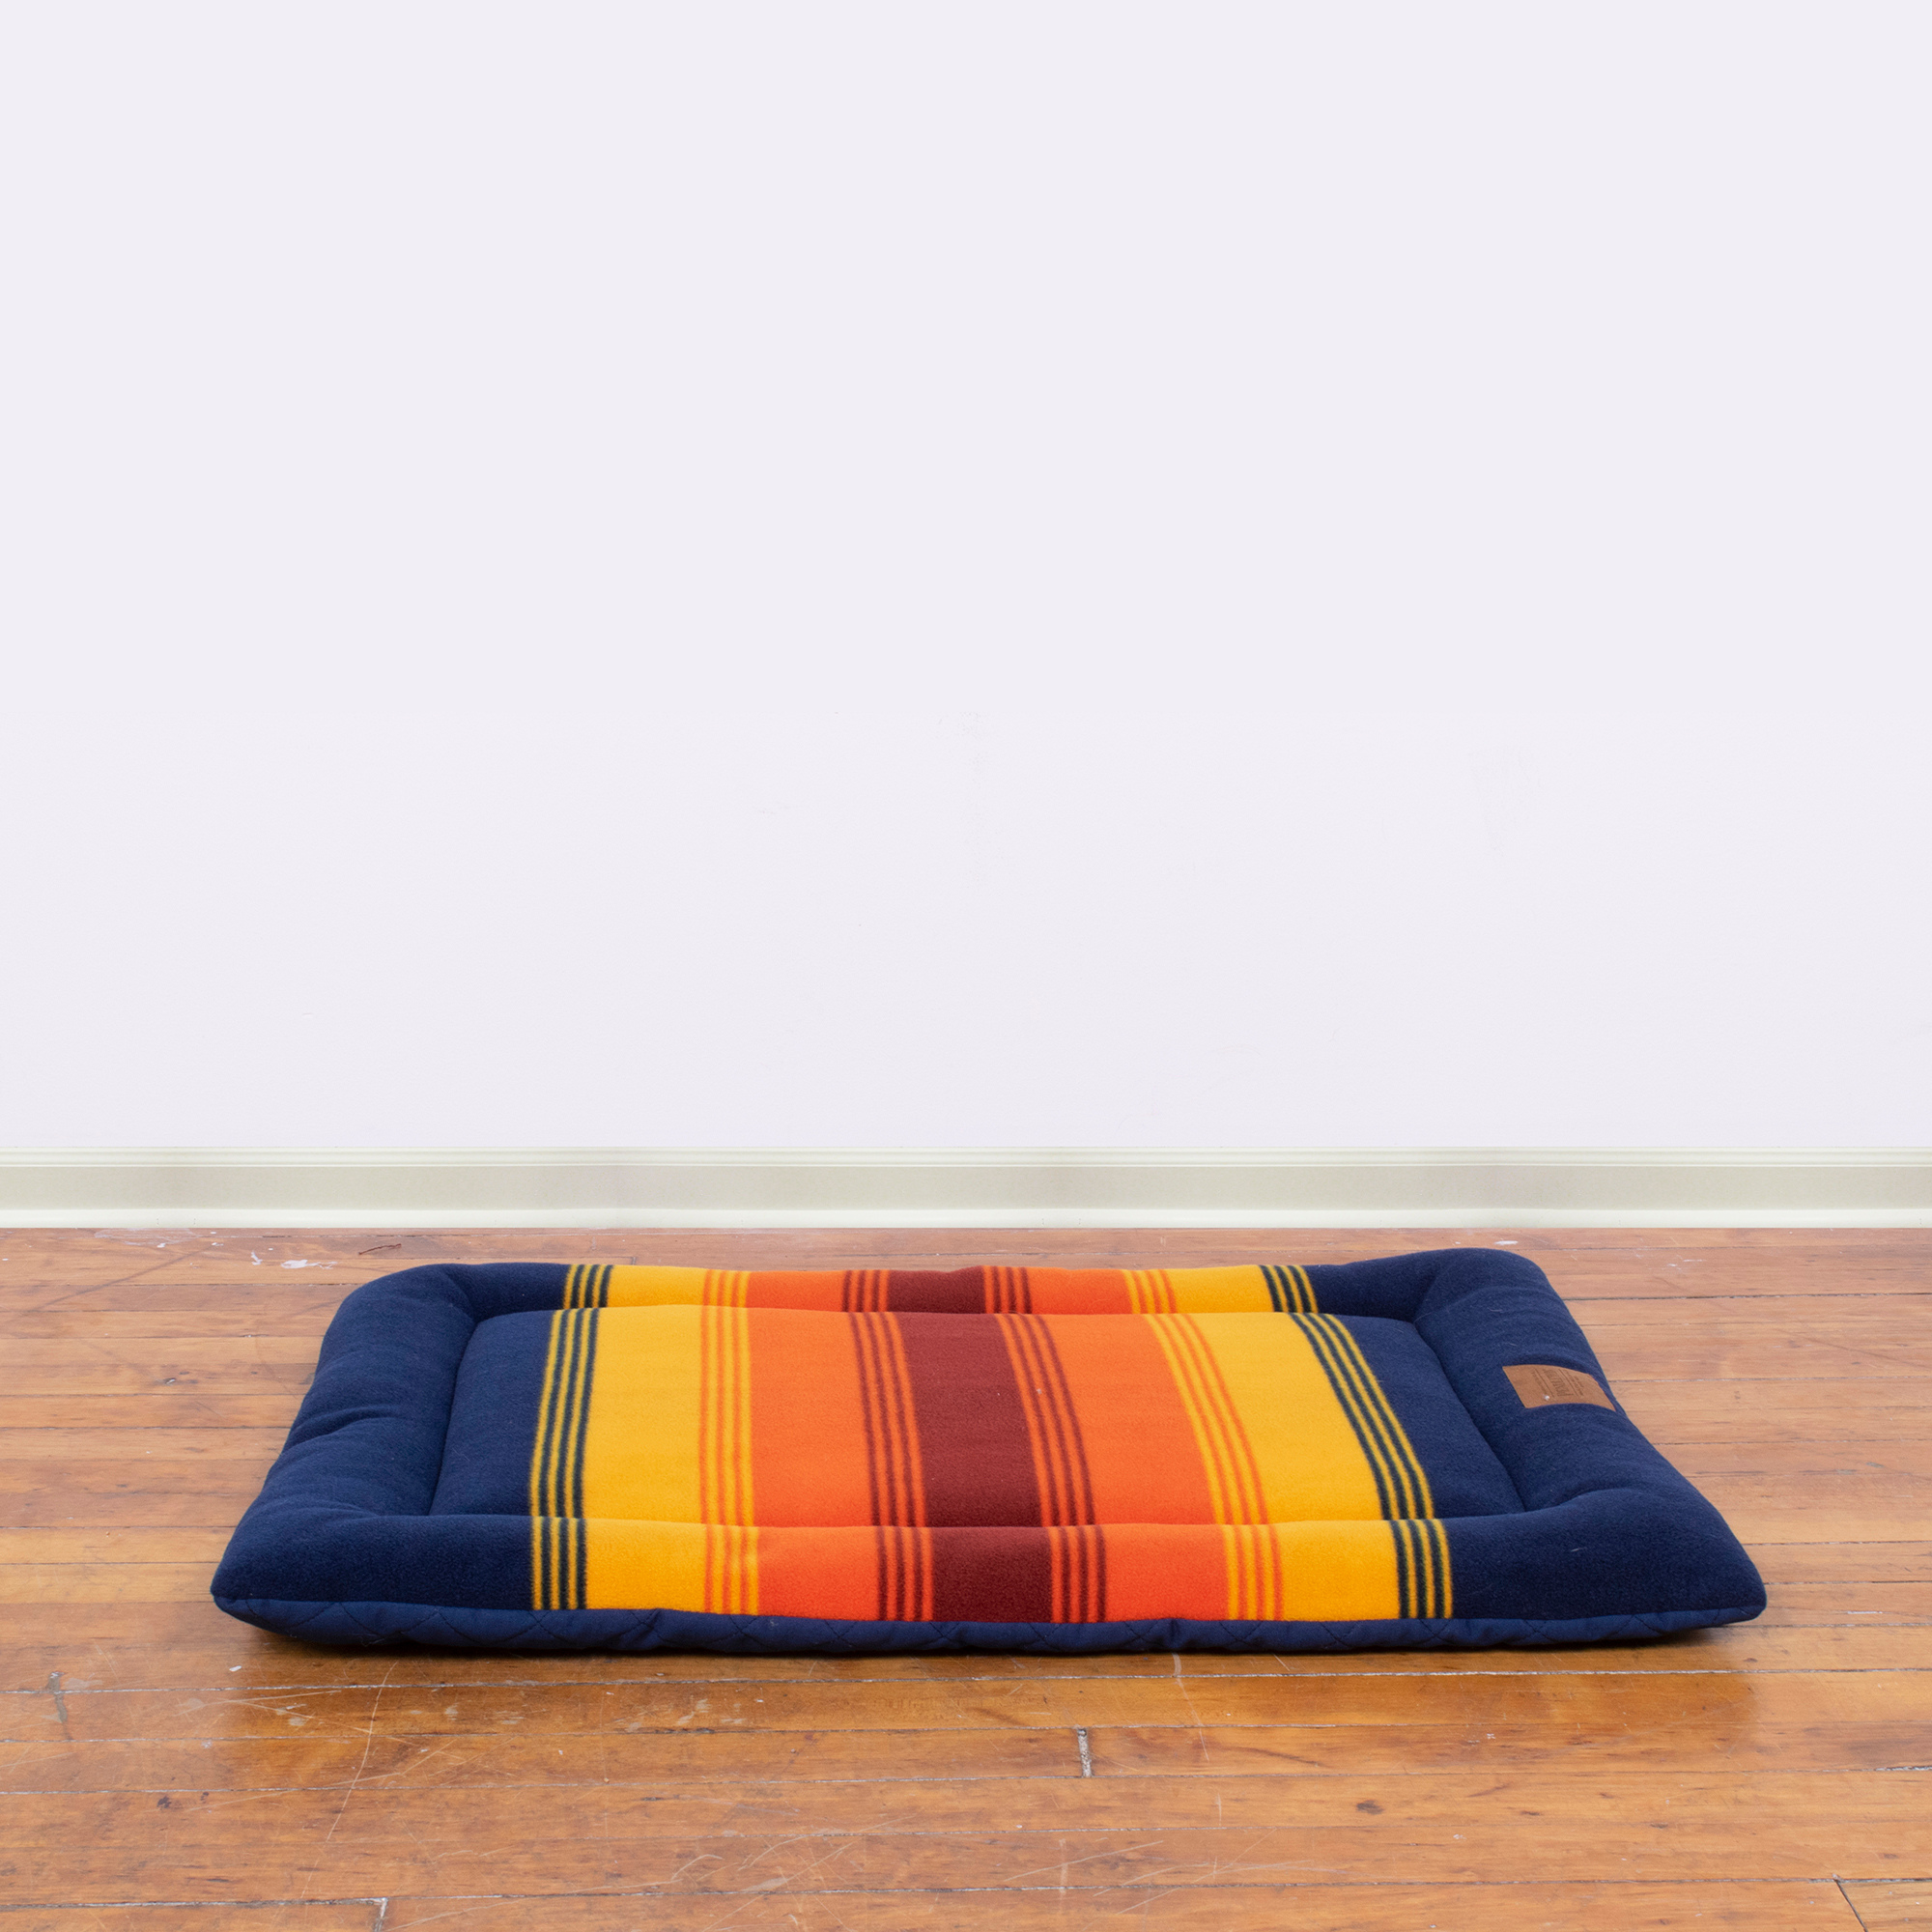 PENDLETON-DOG-BED-KENNEL-MAT-CRATE-BLUE-YELLOW-RED-ORANGE-GRAND-CANYON-NATIONAL-PARK